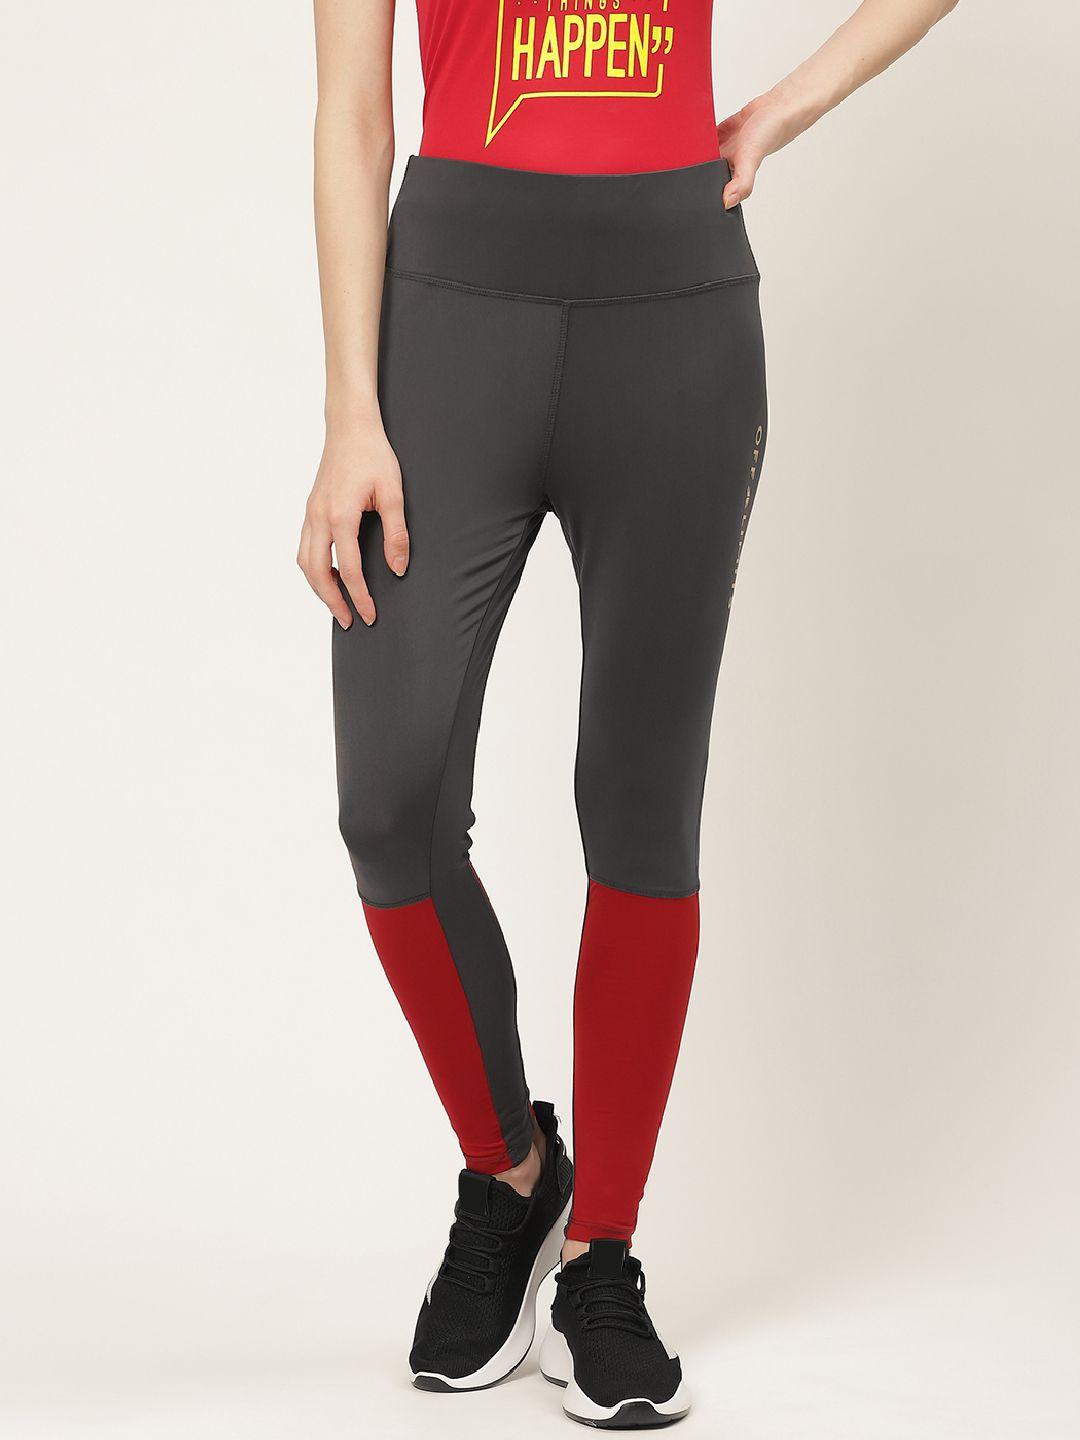 off-limits-women-charcoal-grey-&-red-colourblocked-gym-tights